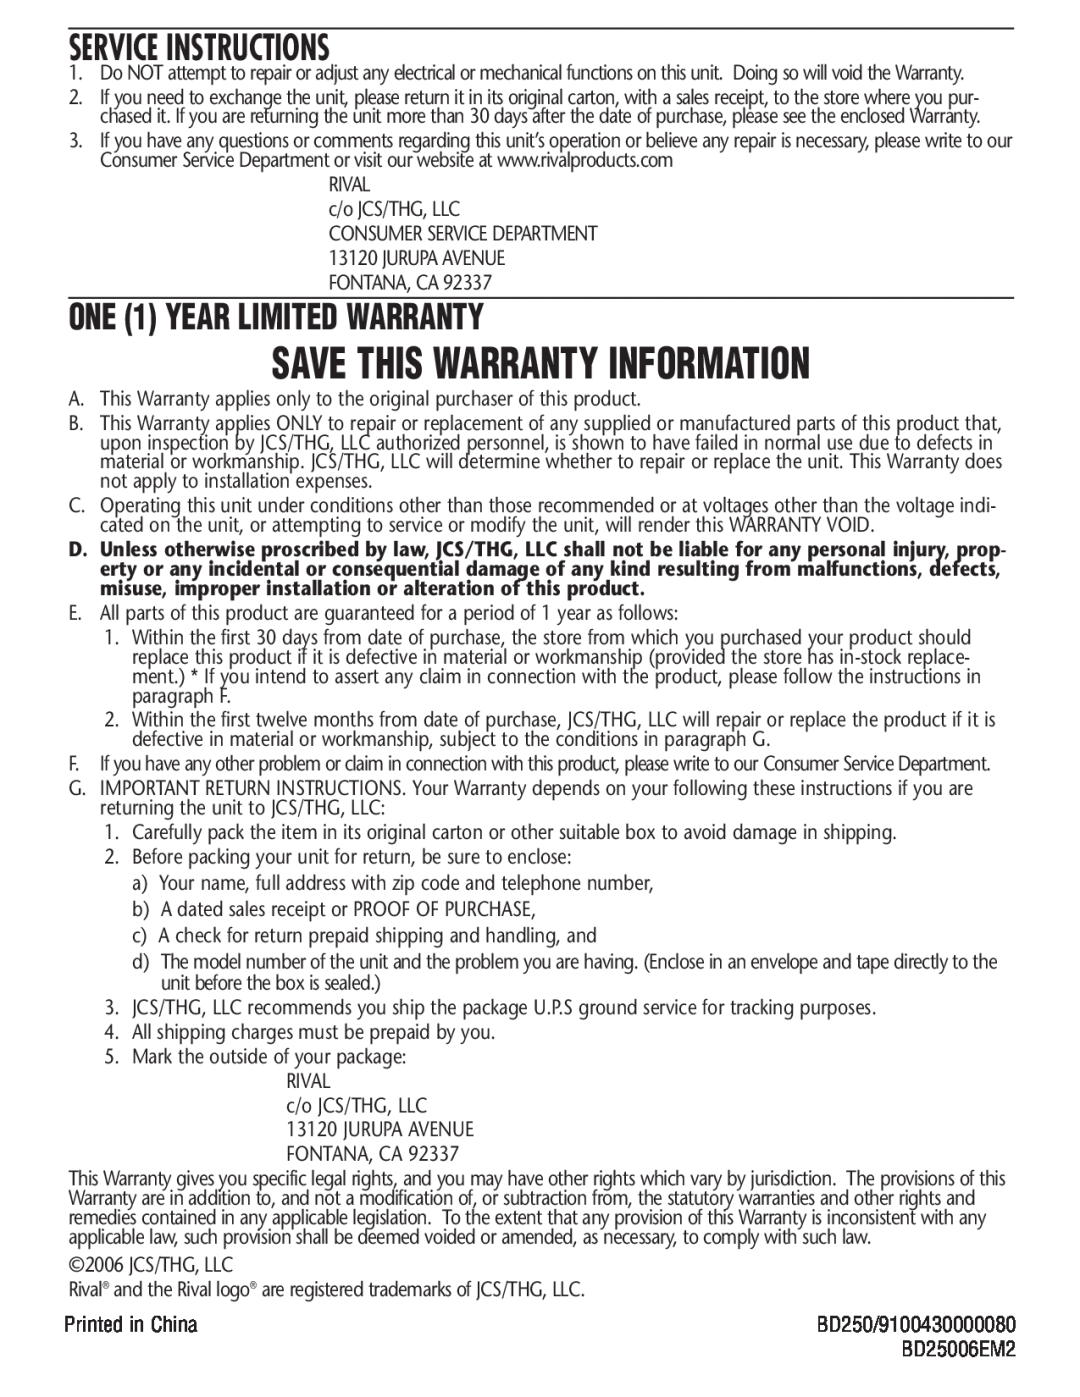 Rival BD250 manual Service Instructions, ONE 1 YEAR LIMITED WARRANTY, Save This Warranty Information 